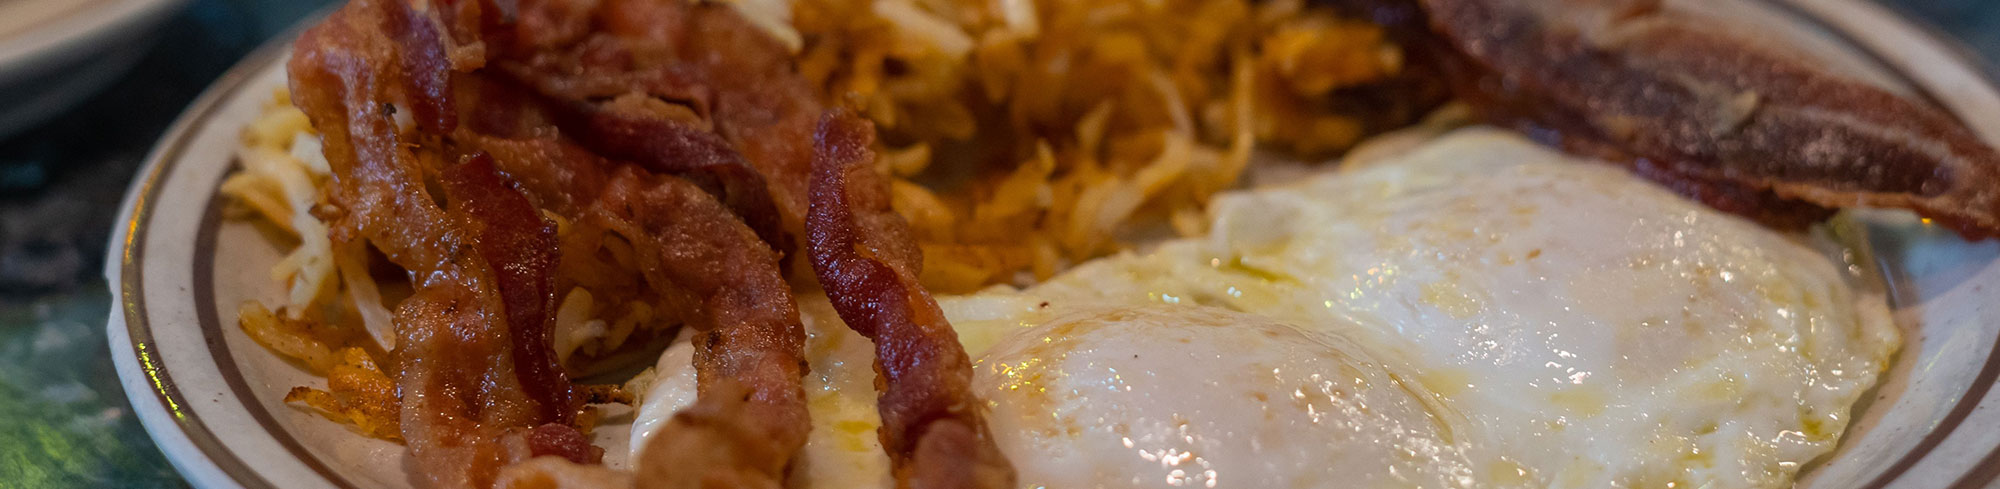 Eggs, bacon, and hash browns on a plate